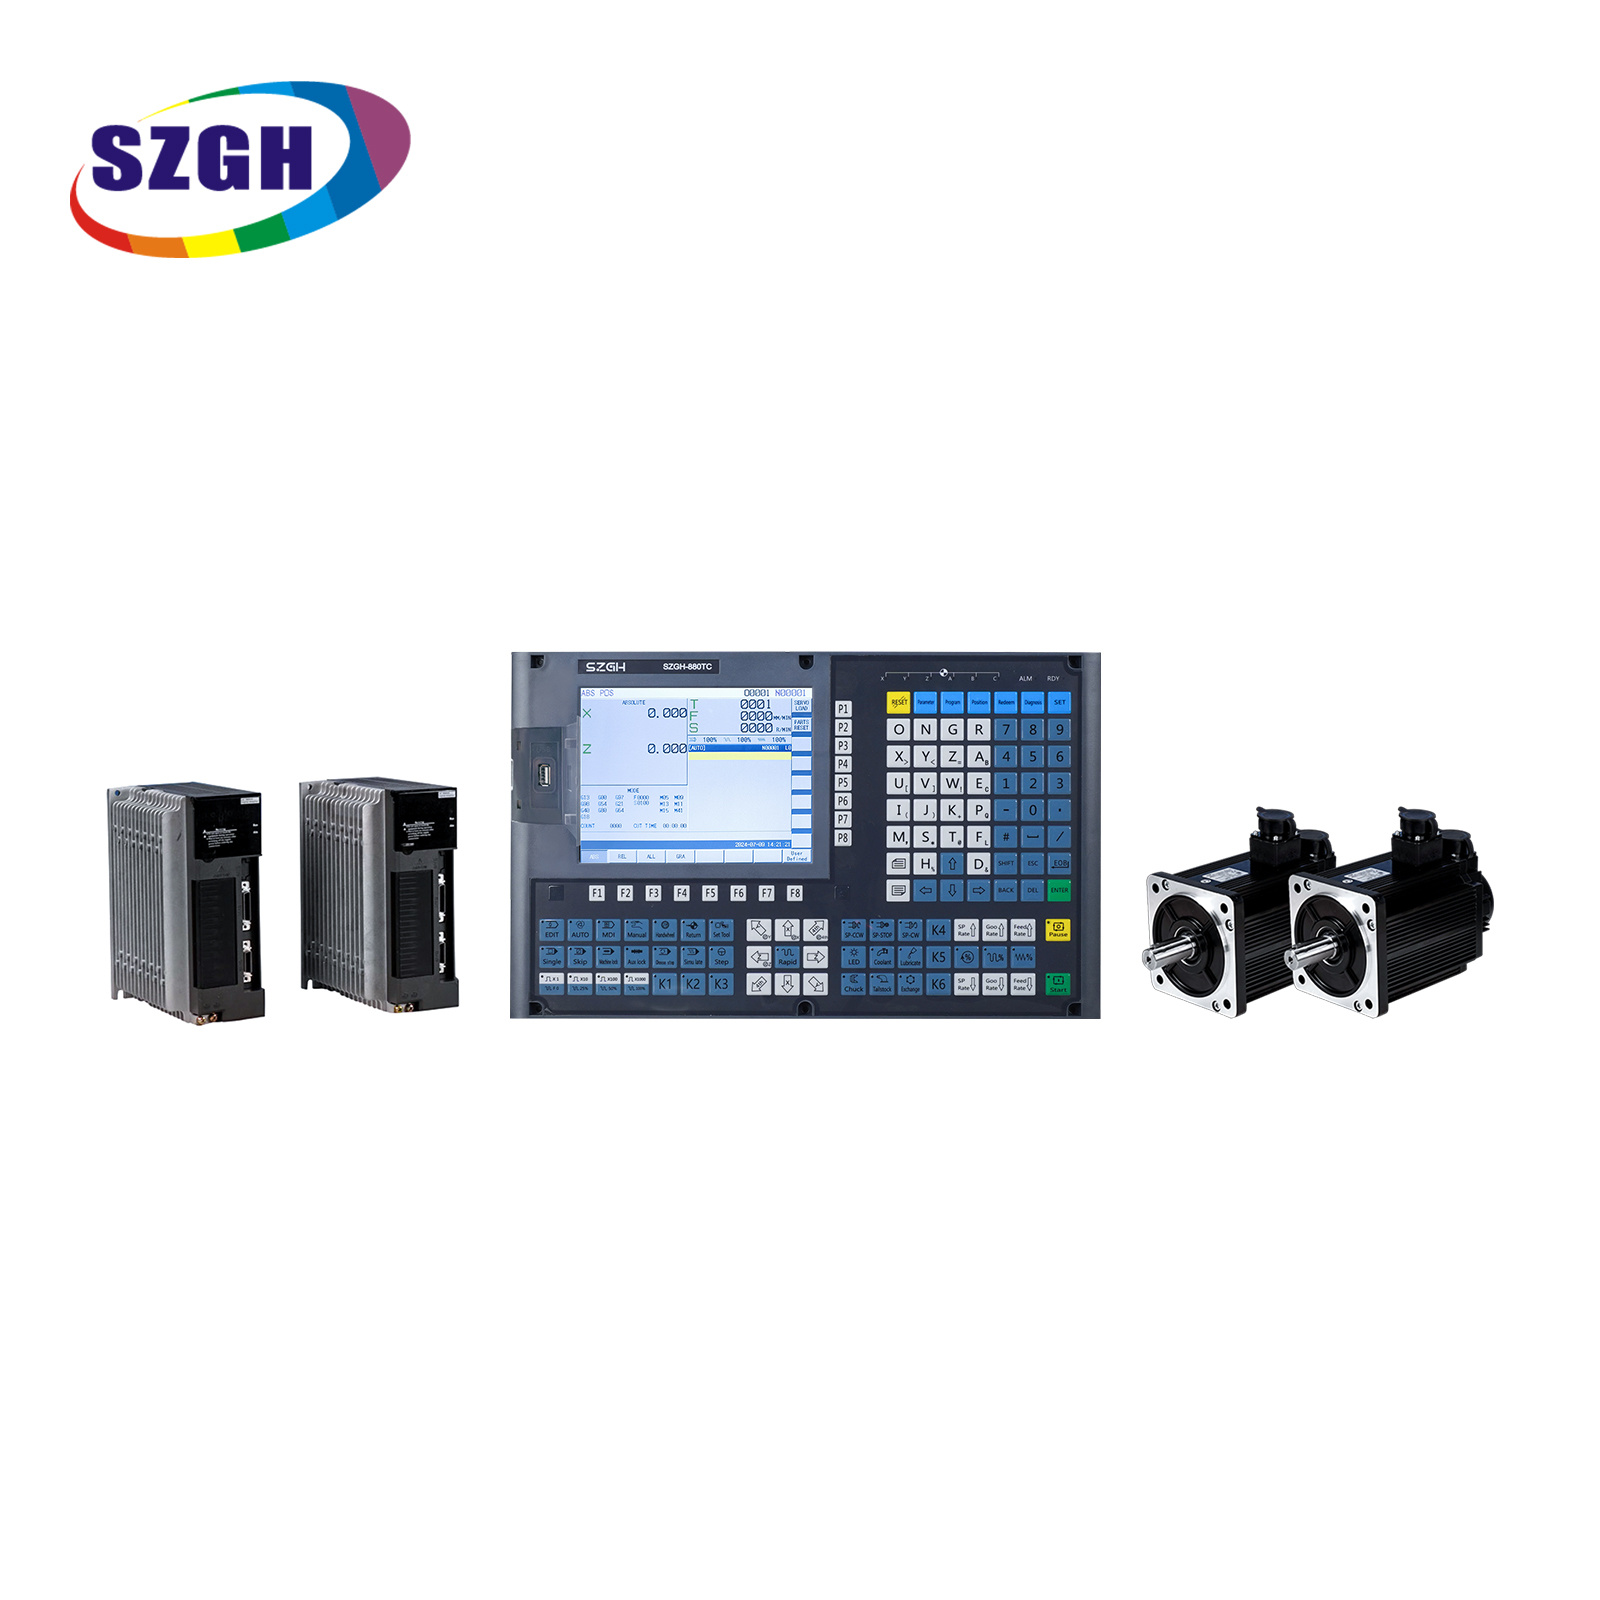 Test and operation of lathe controller SZGH-880TC